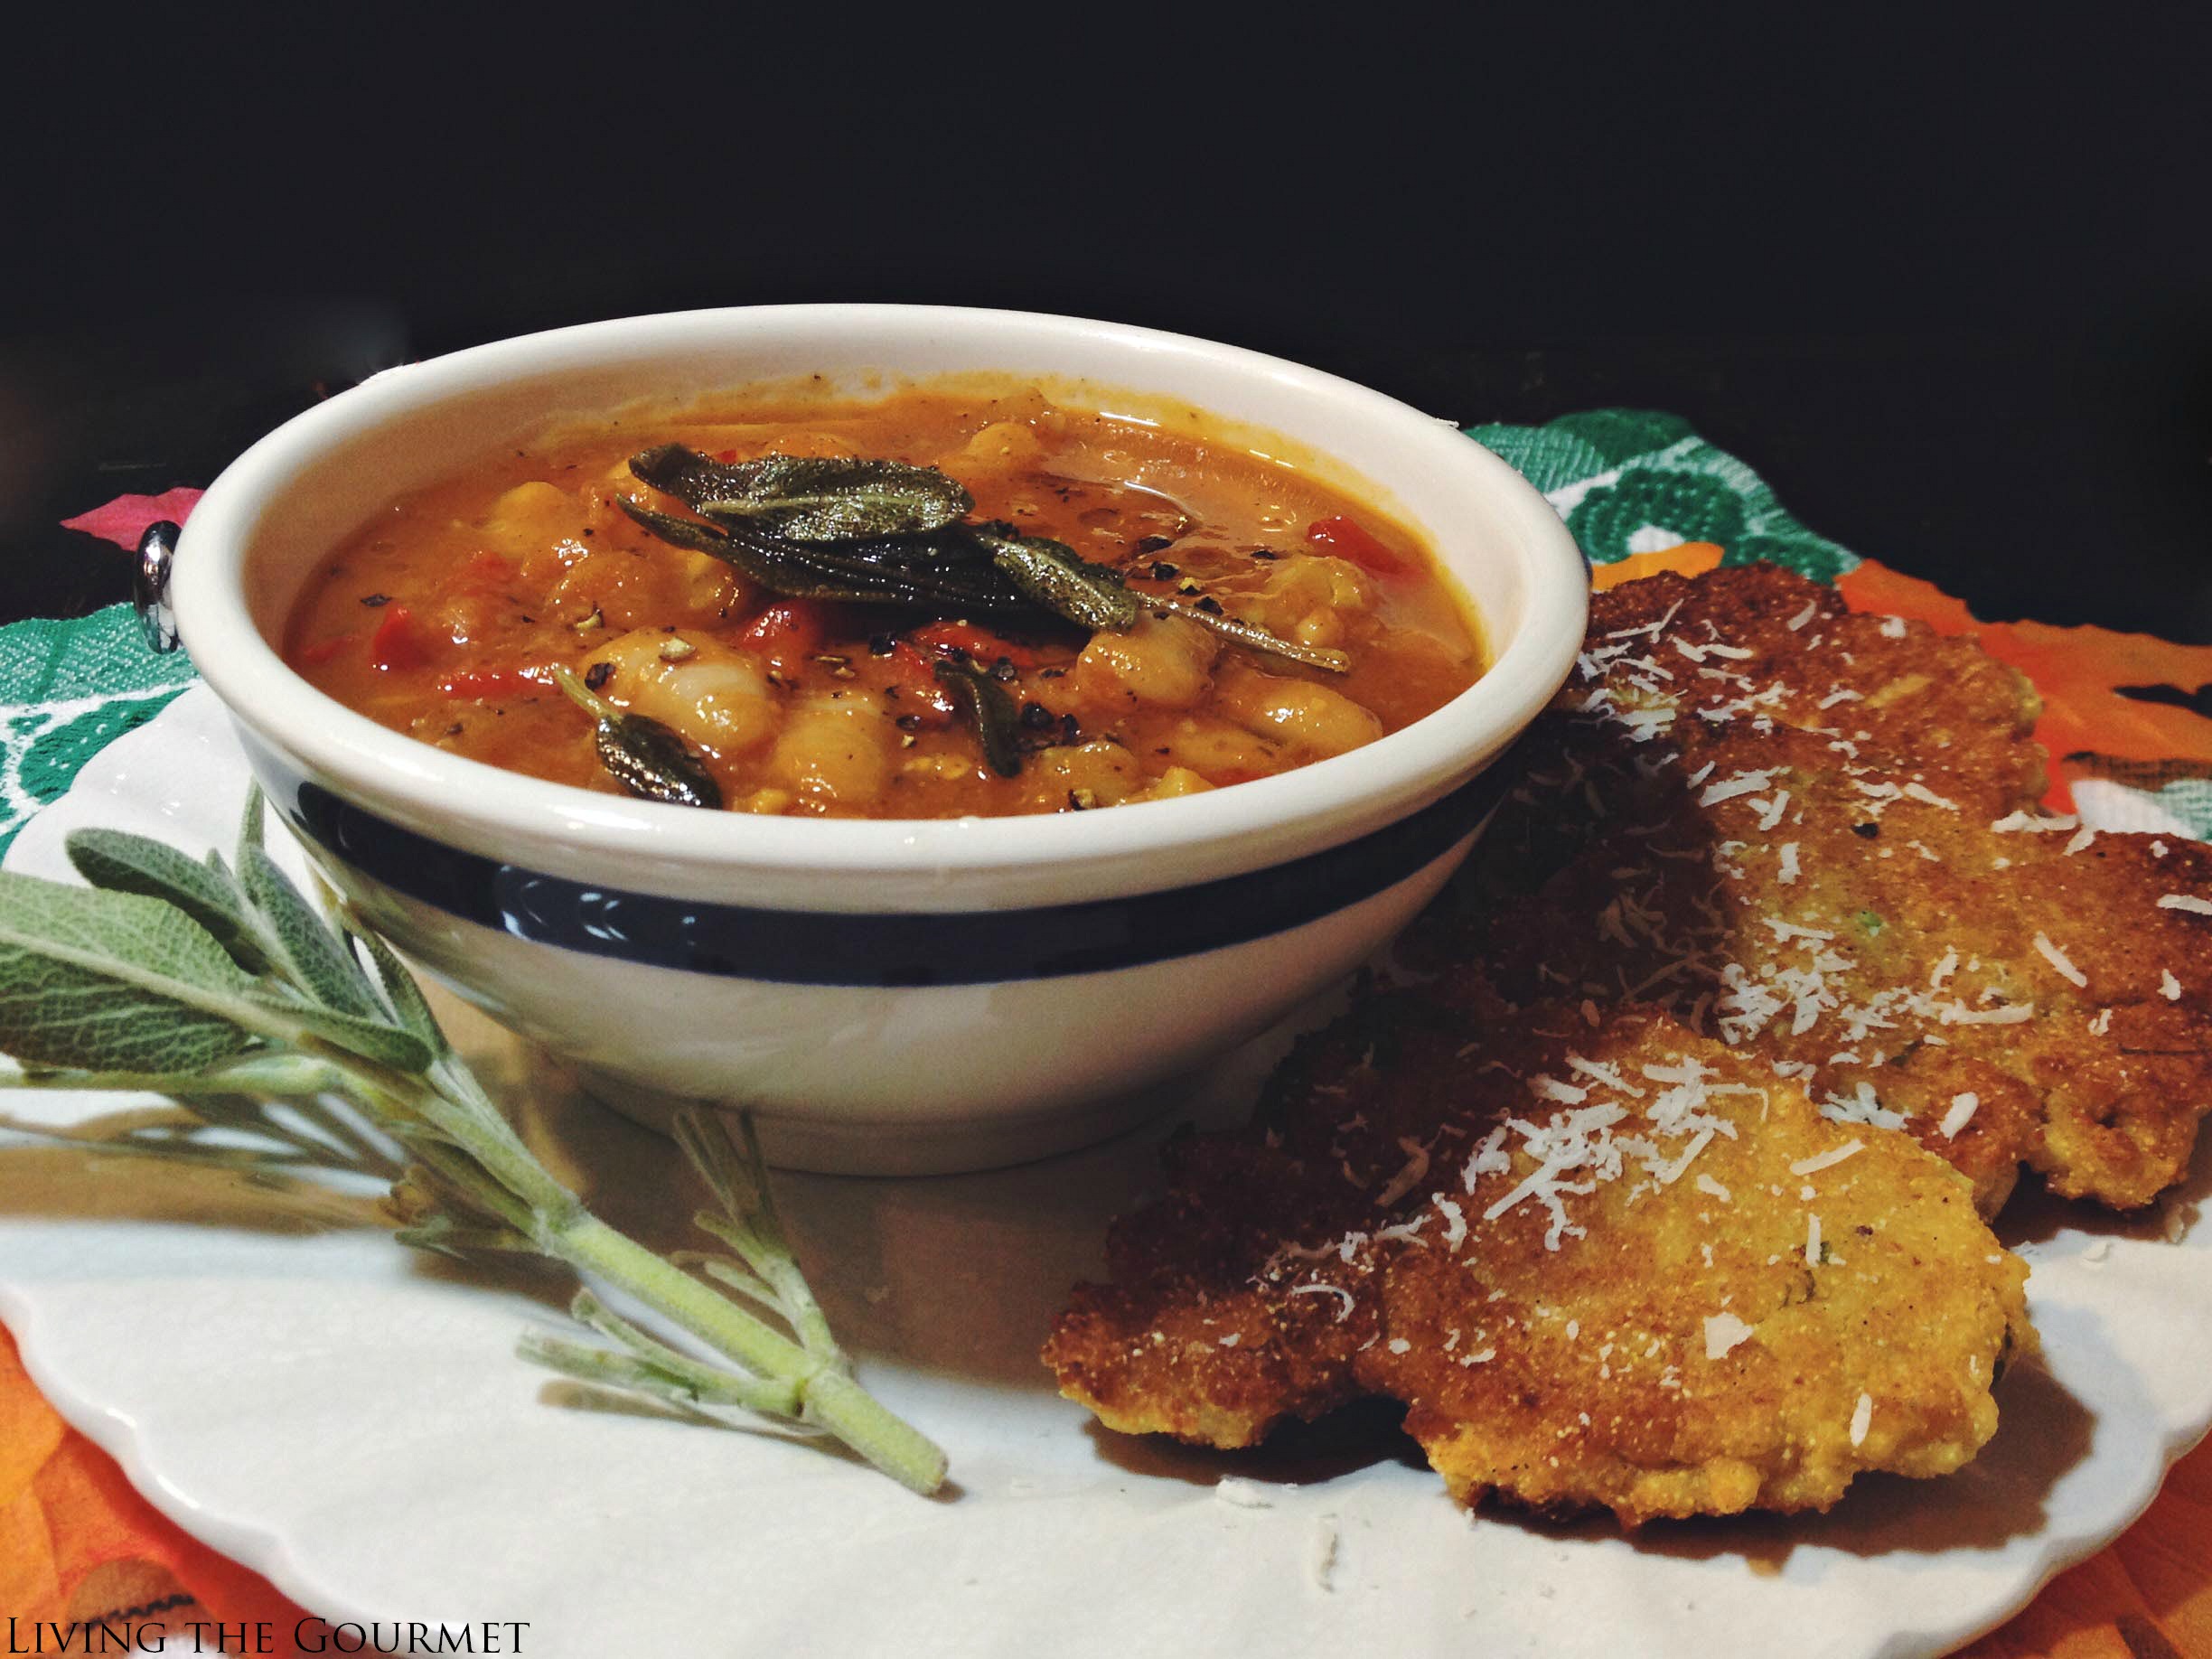 Living the Gourmet: Spicy Pumpkin Soup with Polenta Cakes